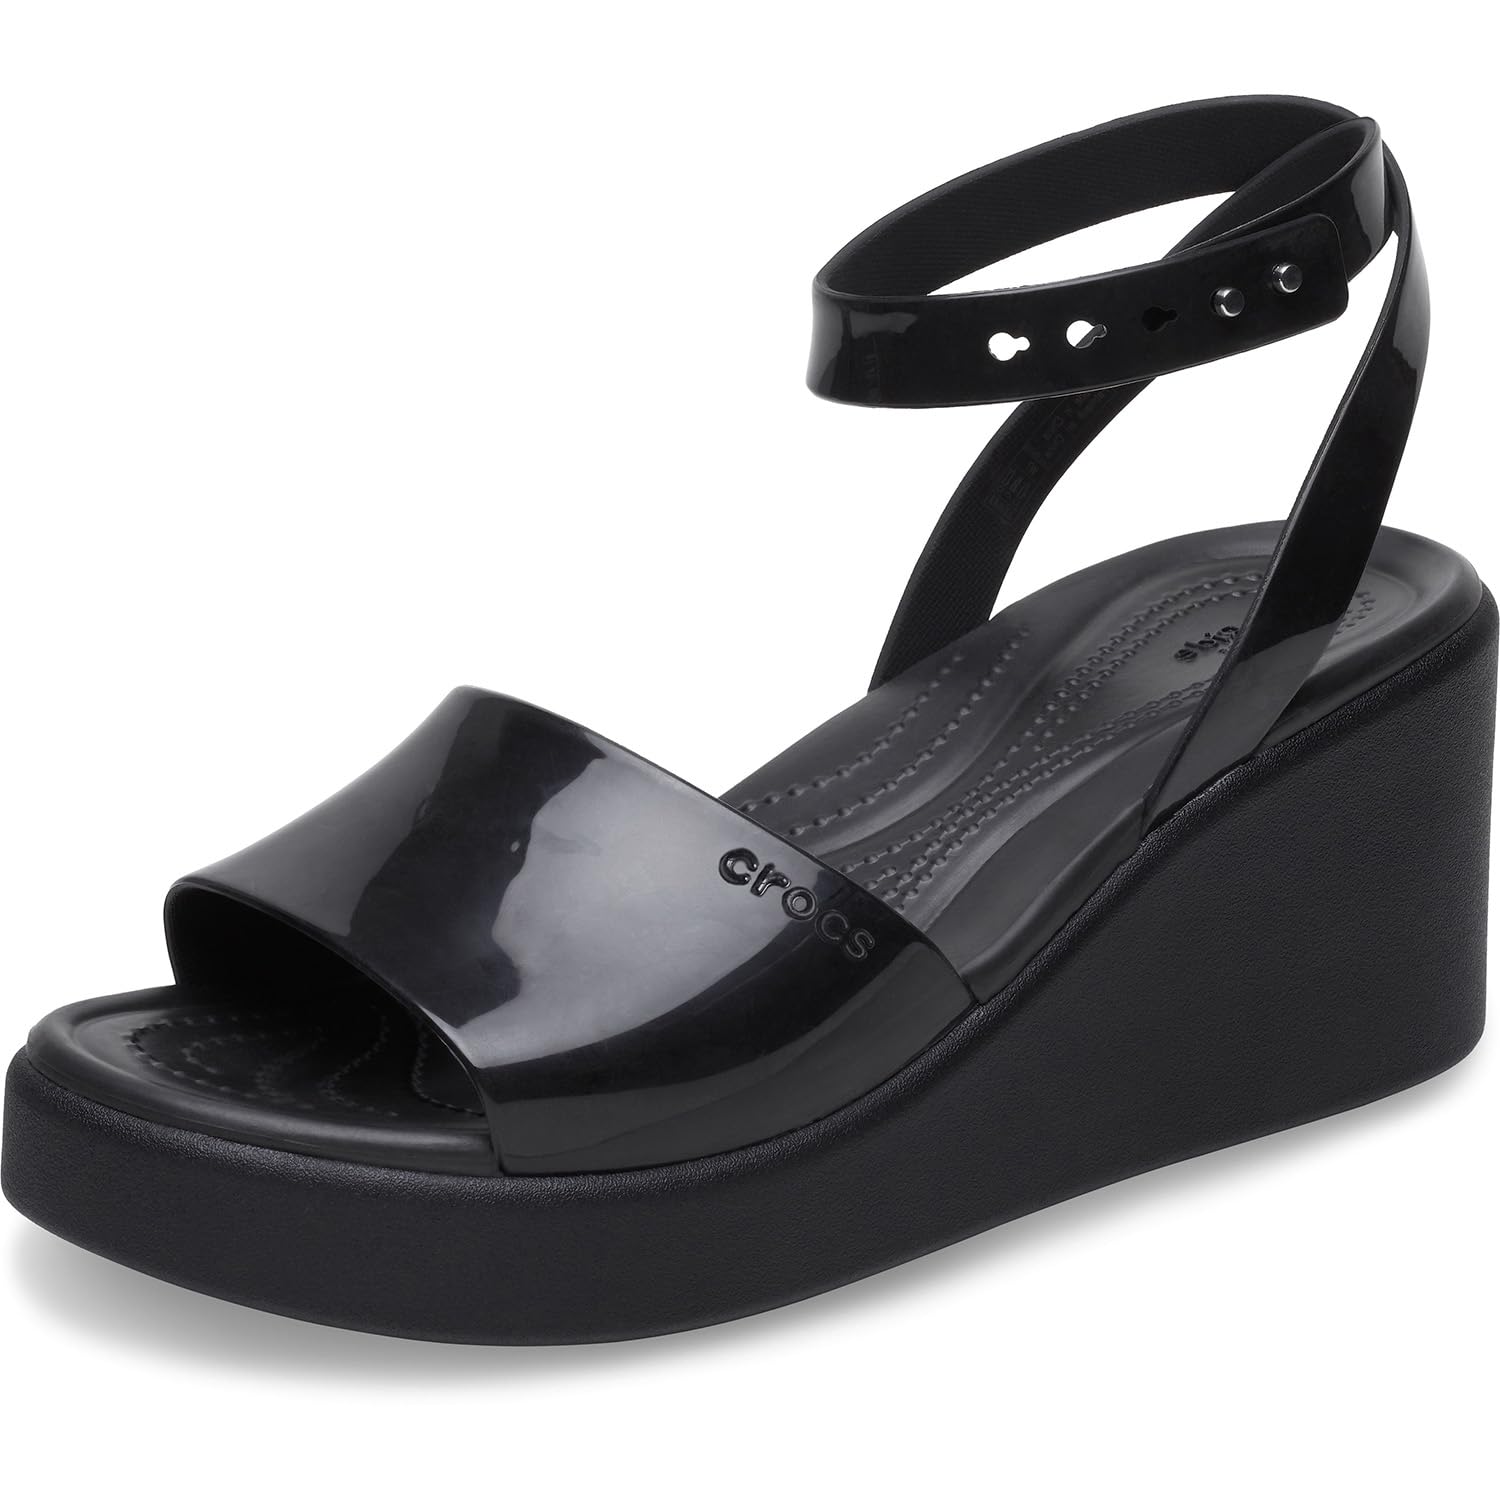 Crocs Brooklyn Ankle Strap Wedges for Women - Thermoplastic Upper - Thermoplastic Lining and Footbed